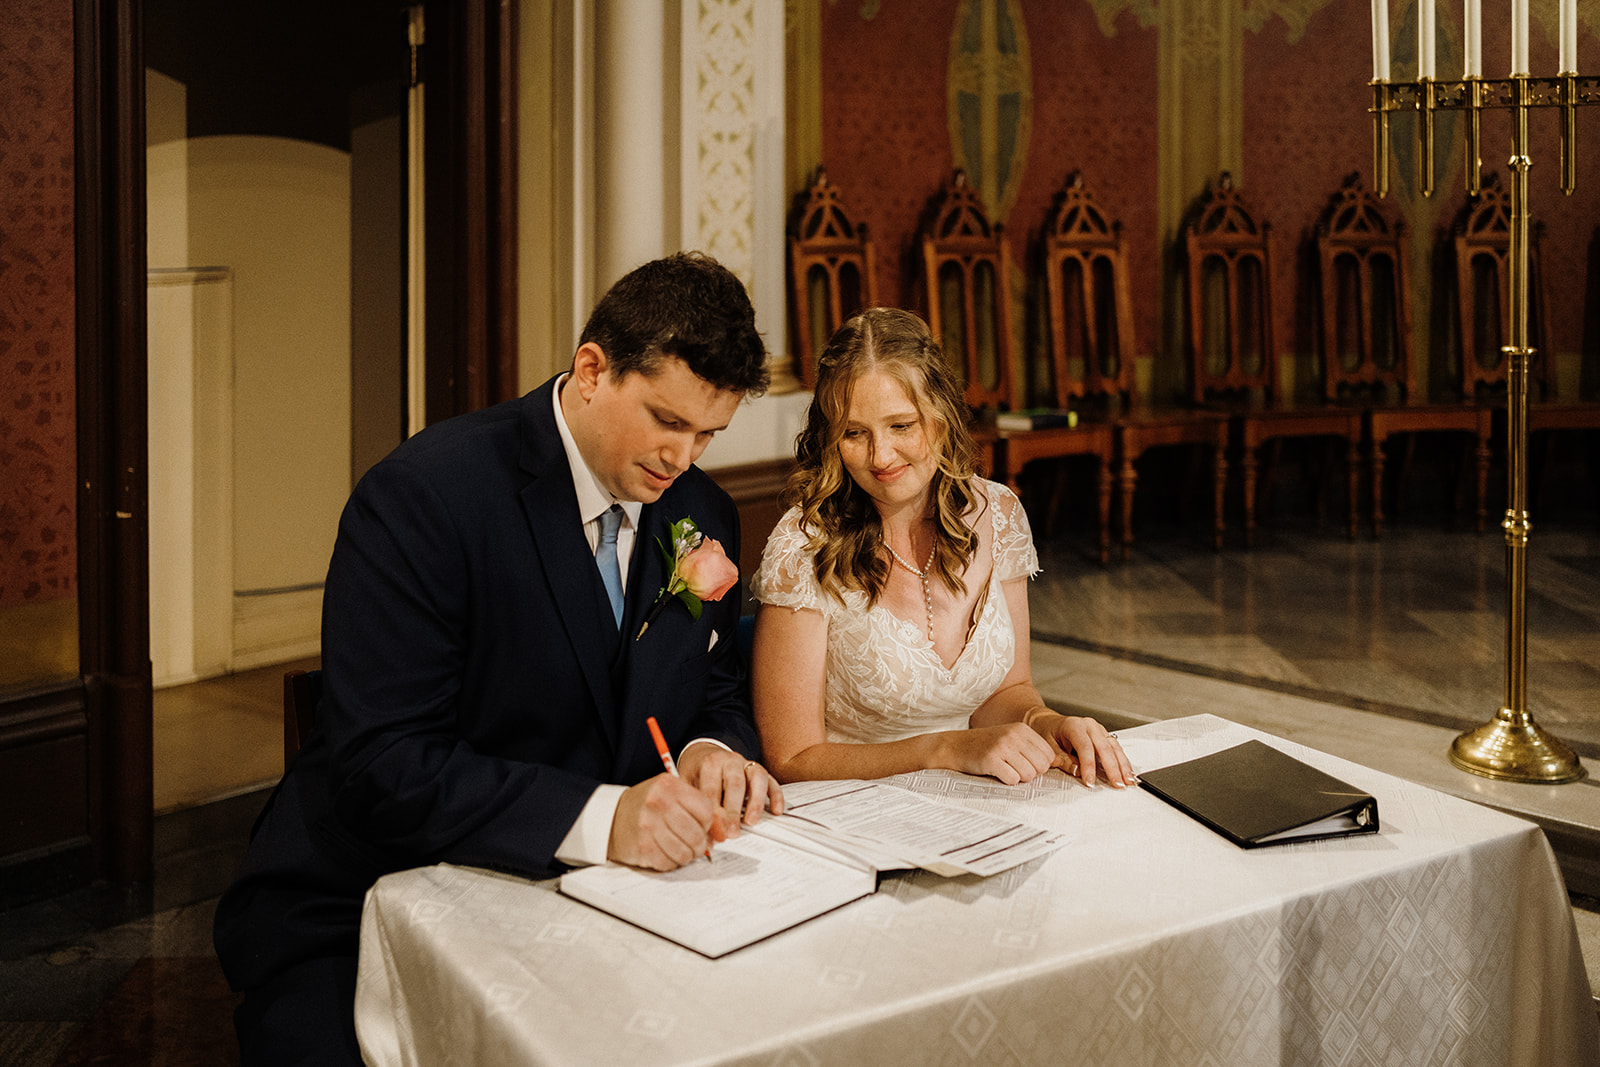 Bride and groom sign papers.